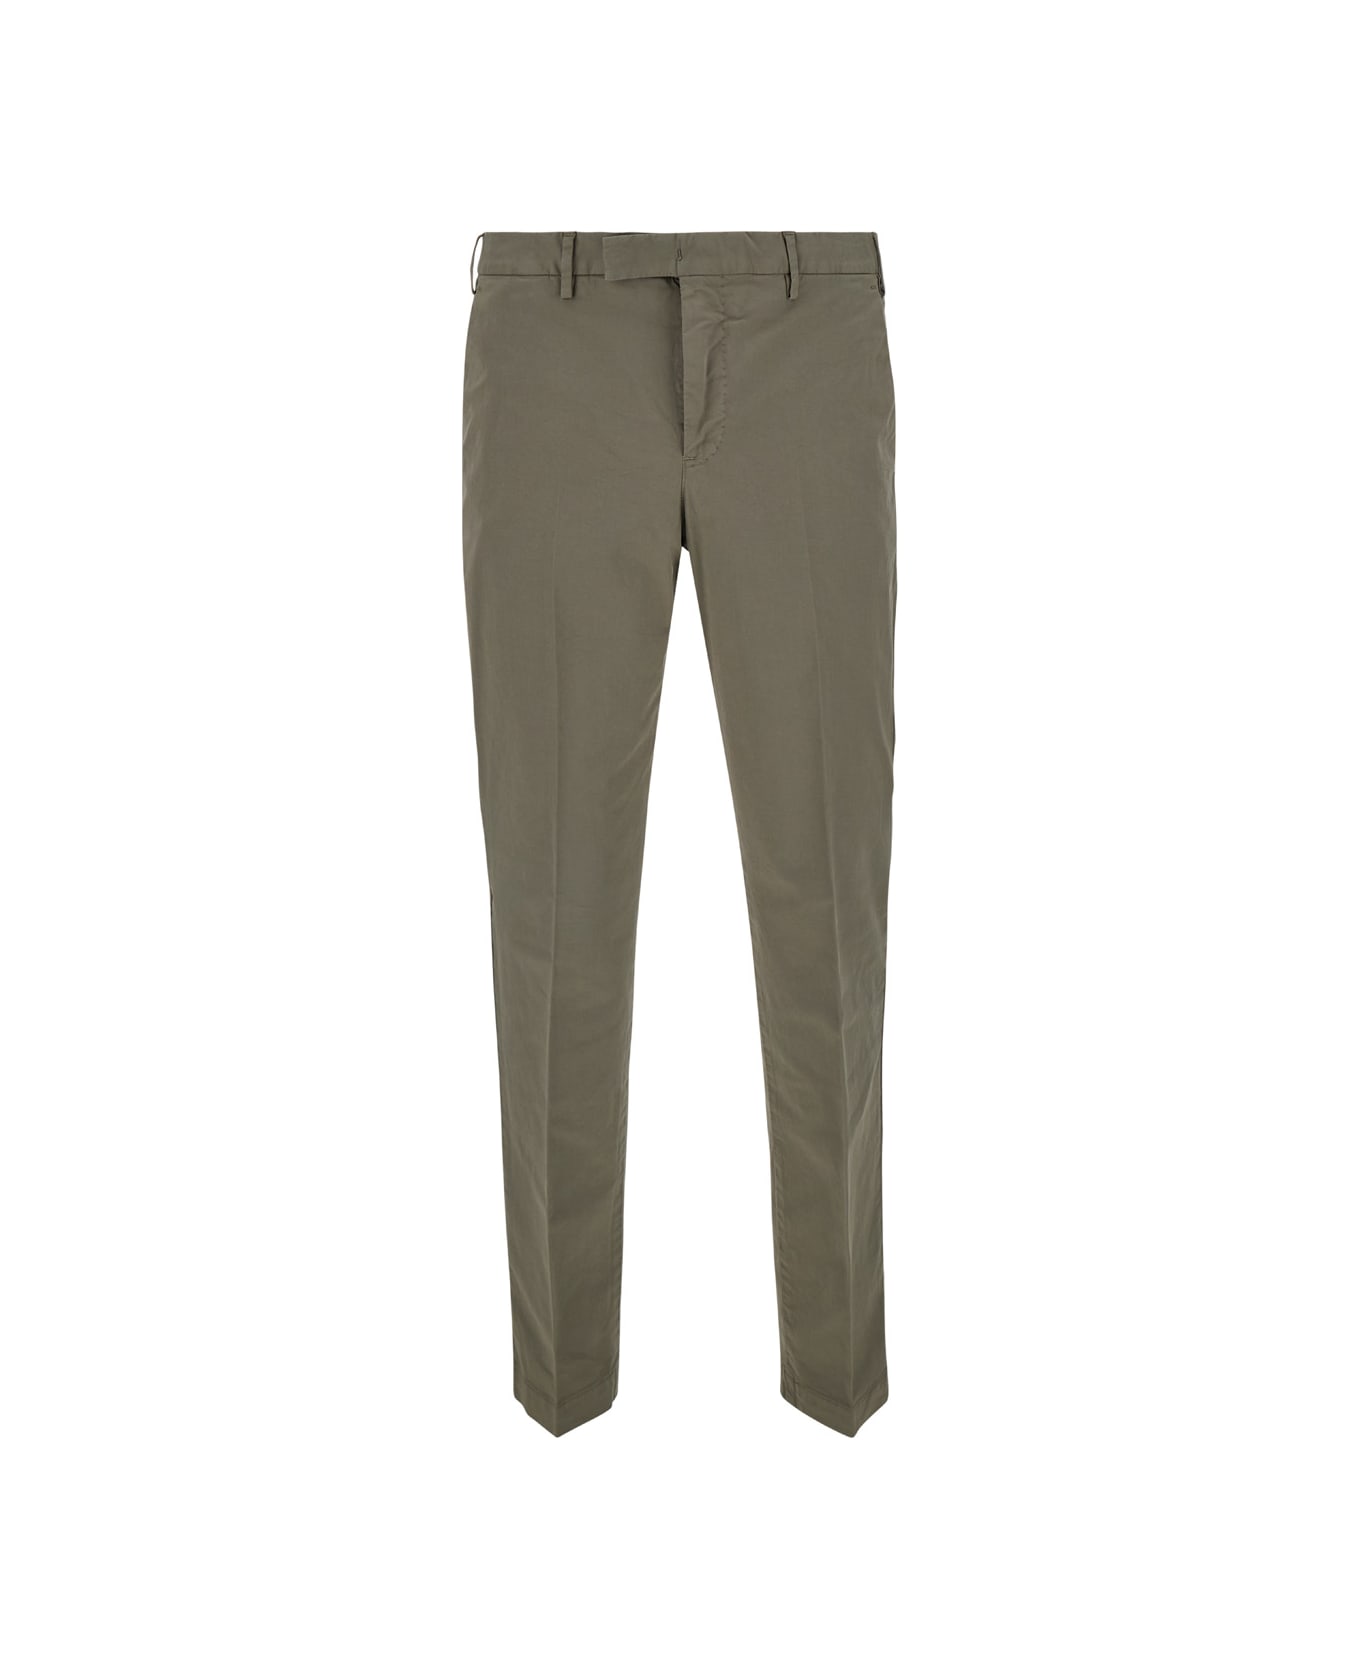 PT01 Sartorial Slim Fit Grey Trousers In Cotton Blend Man - Grey